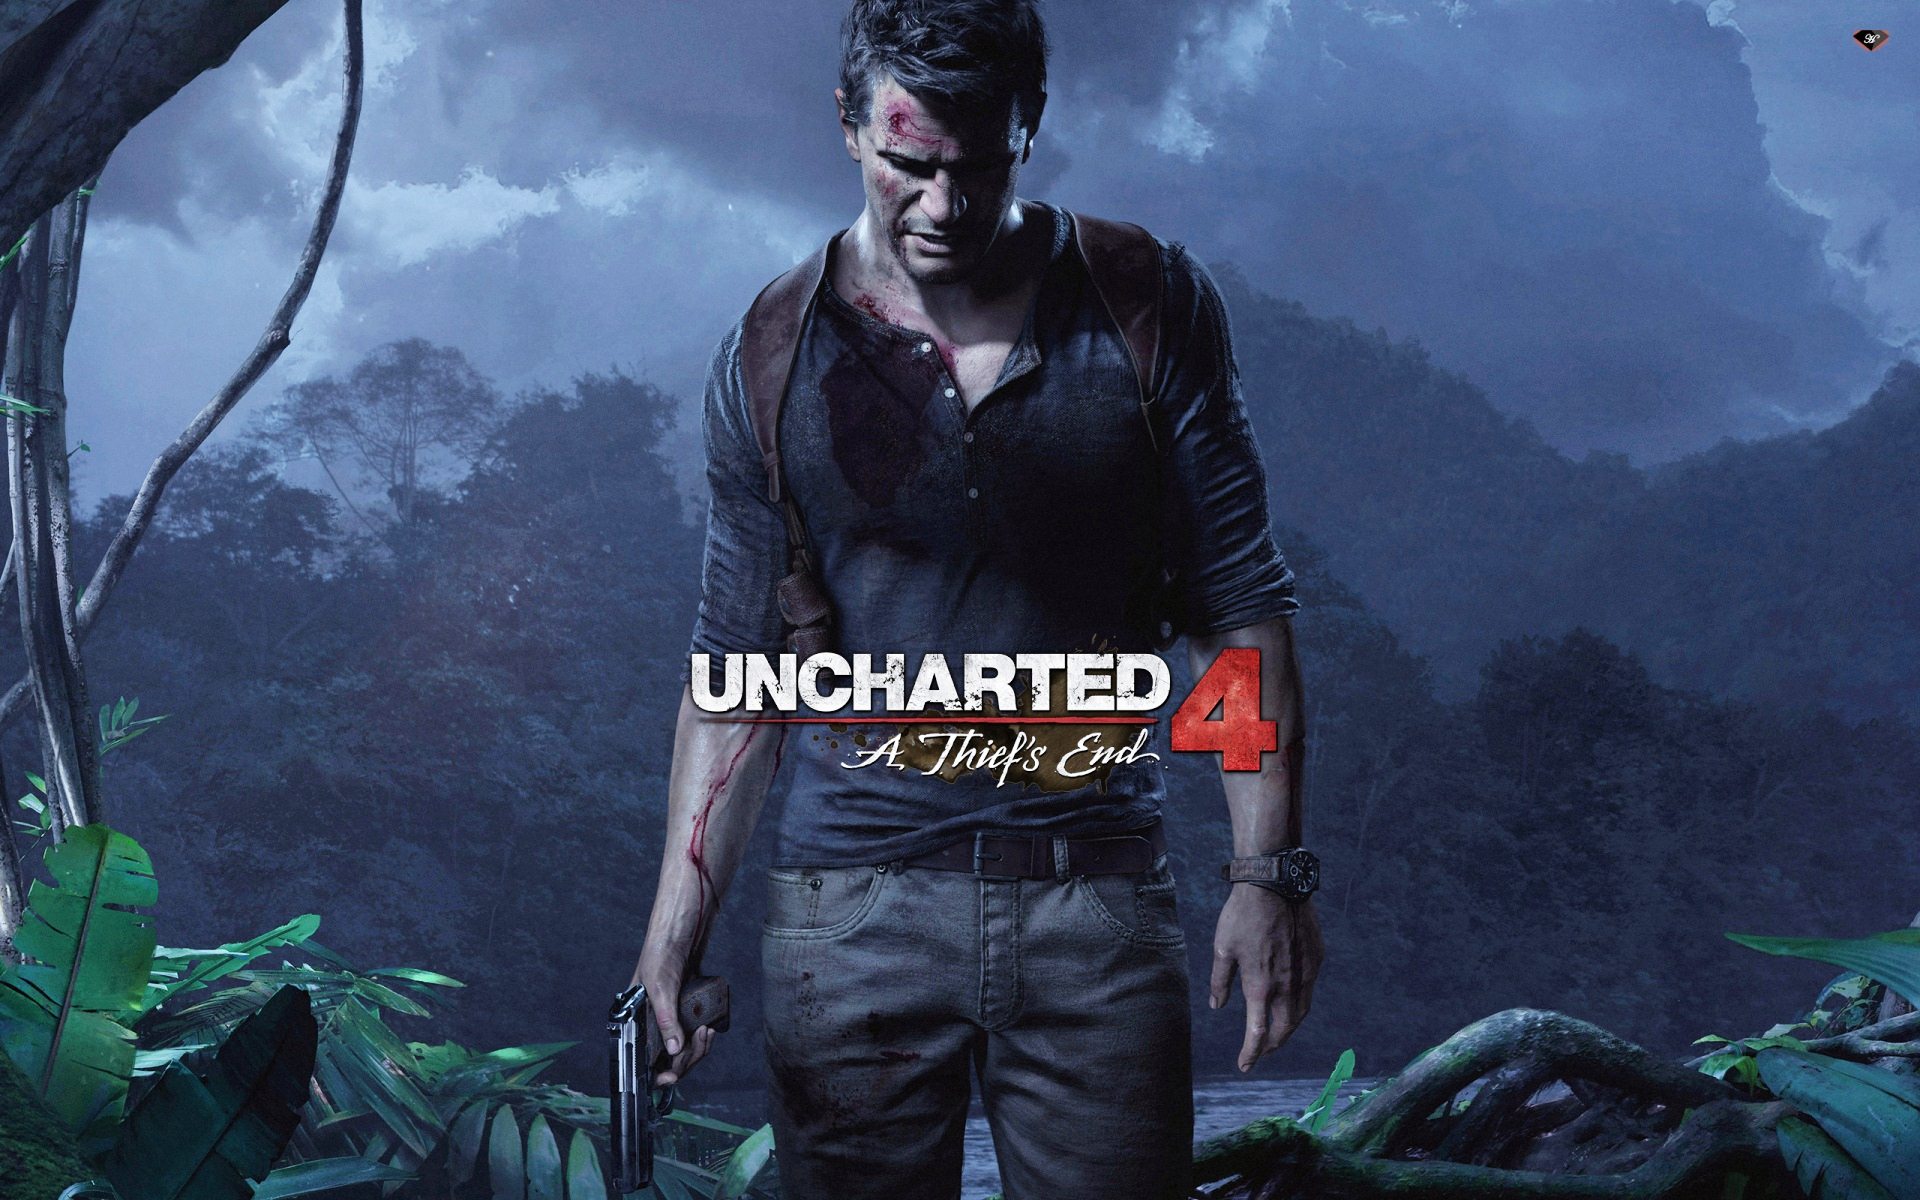 uncharted-4-a-thiefs-end-game-wallpaper